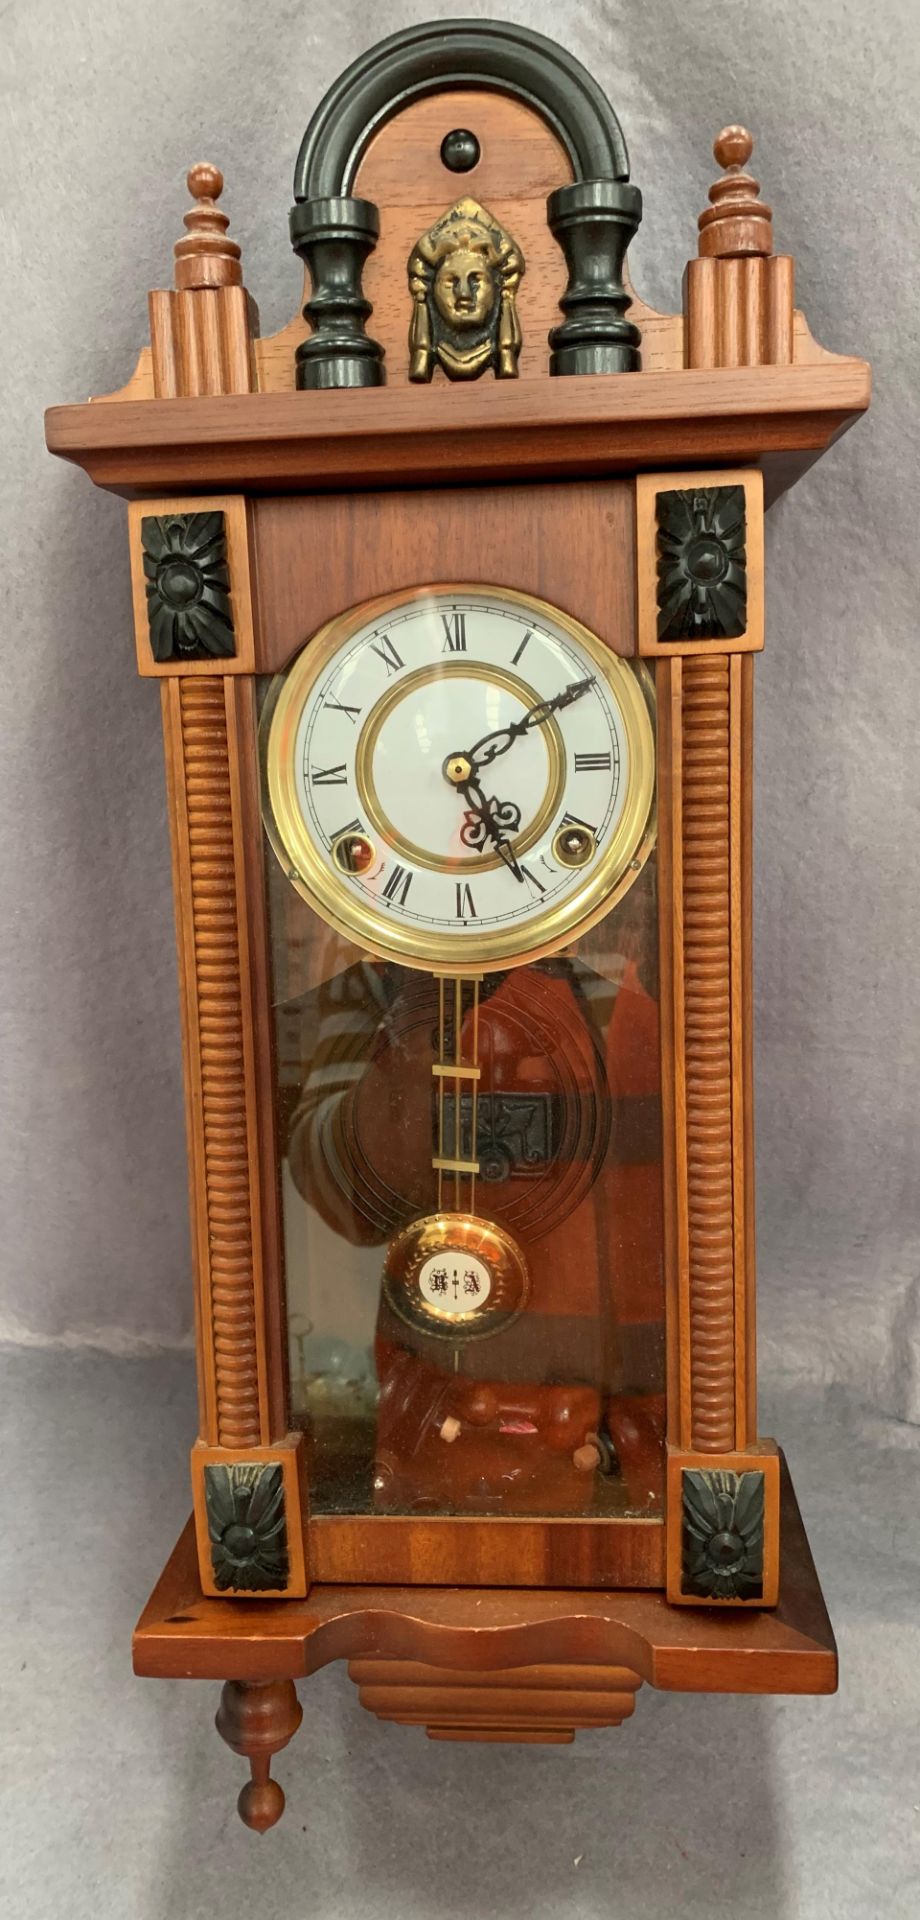 A small modern Viennese style wall clock - 56cm